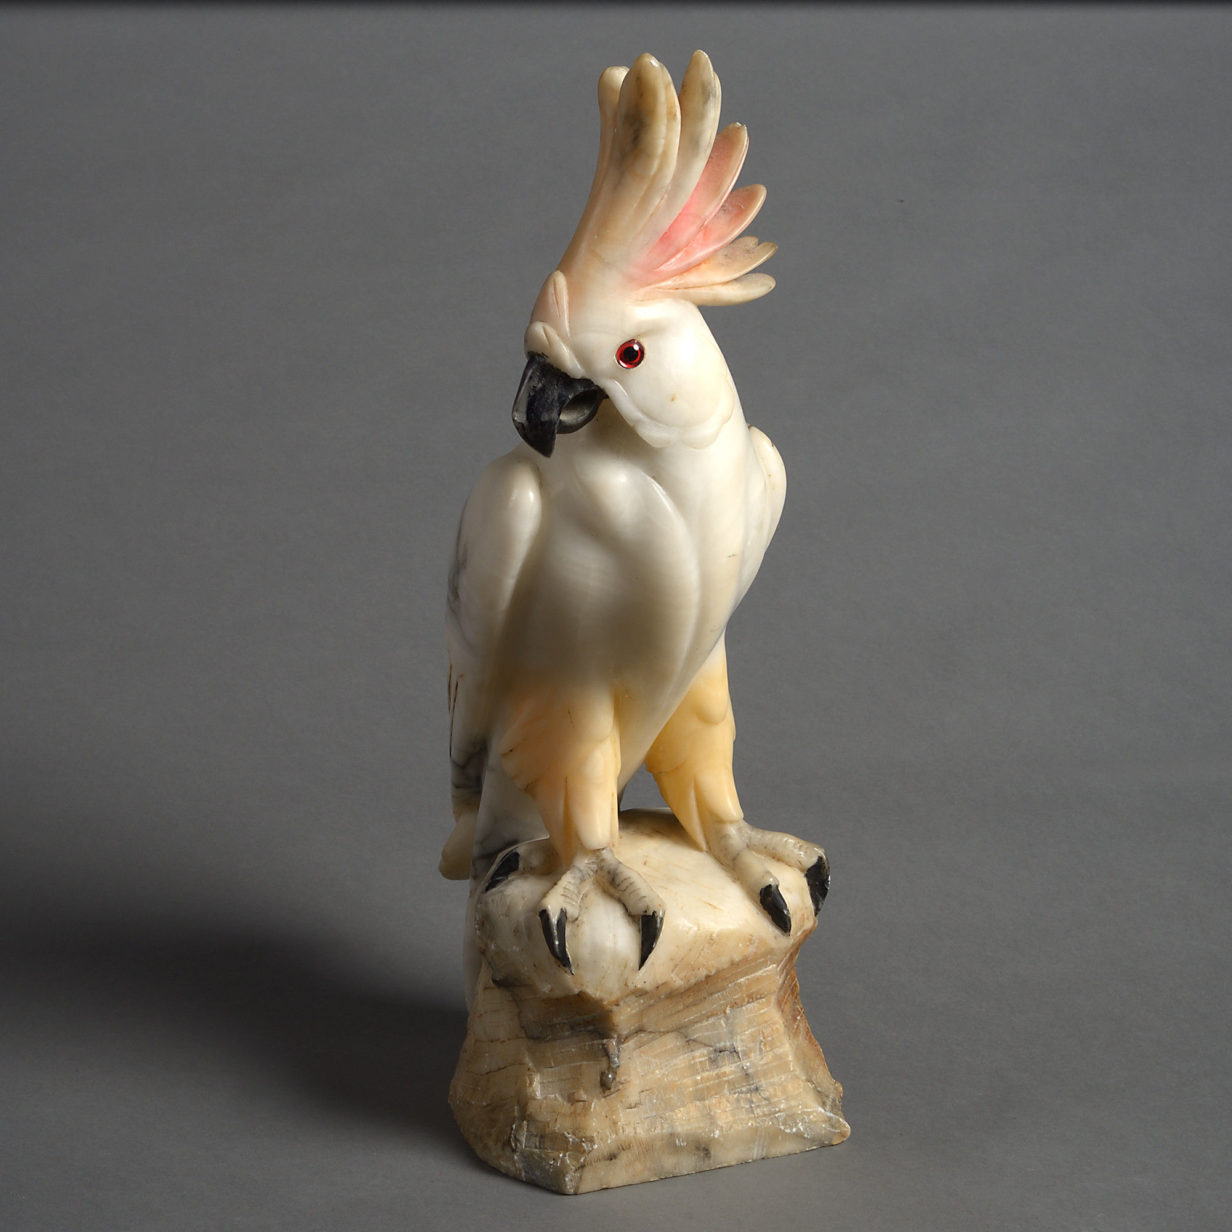 Early 20th century carved alabaster cockatoo